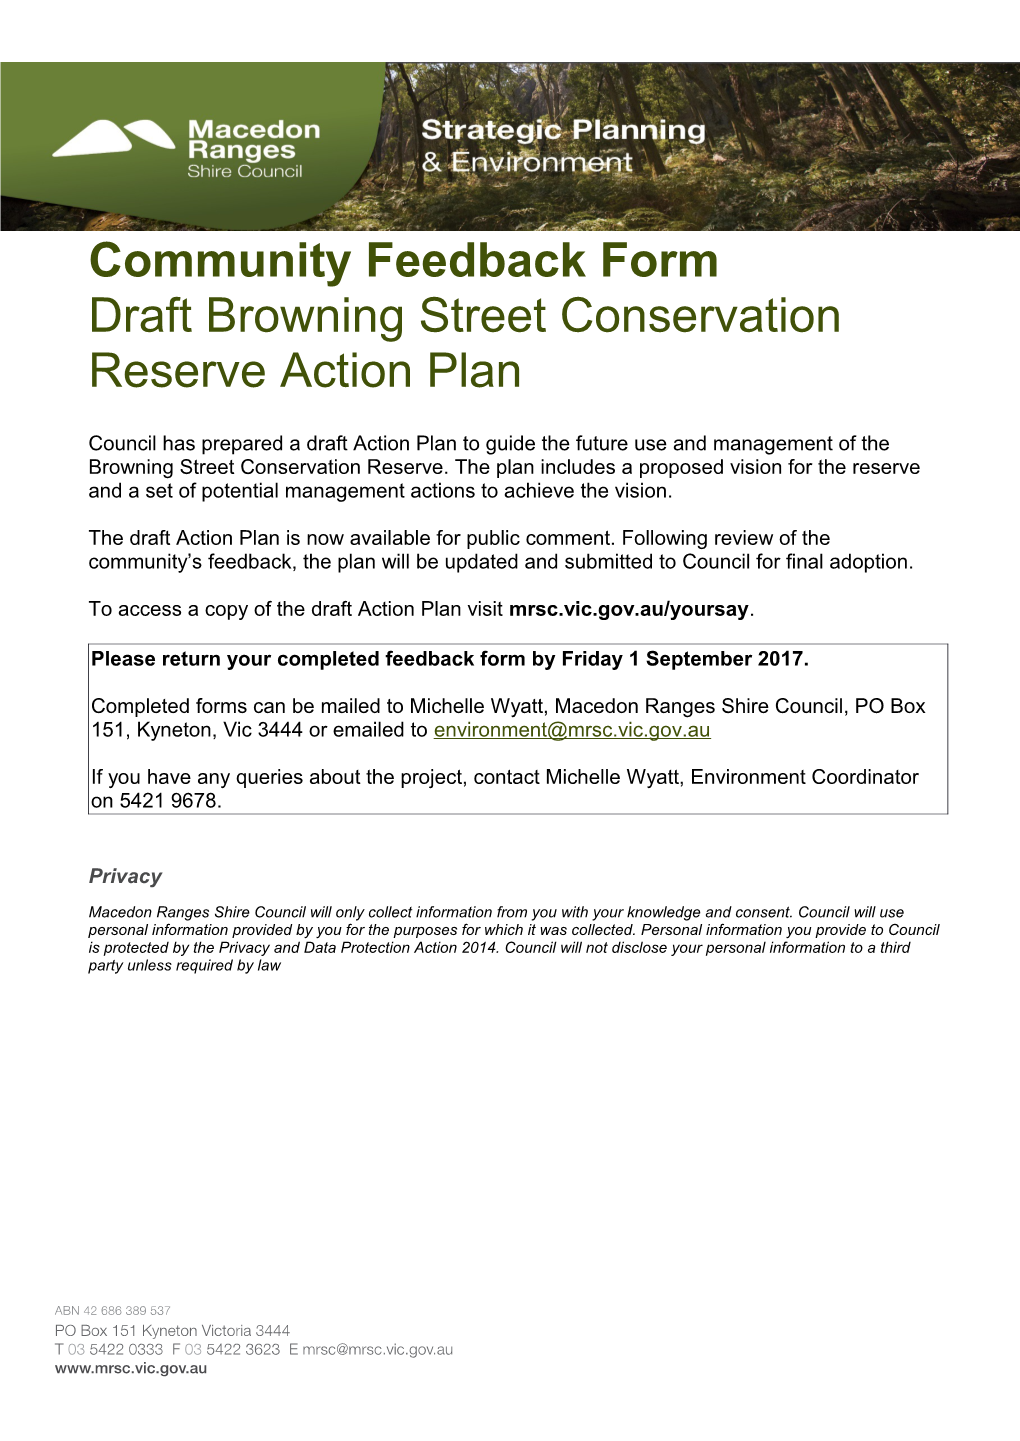 Community Feedback Form Draft Browning Street Conservation Reserve Action Plan